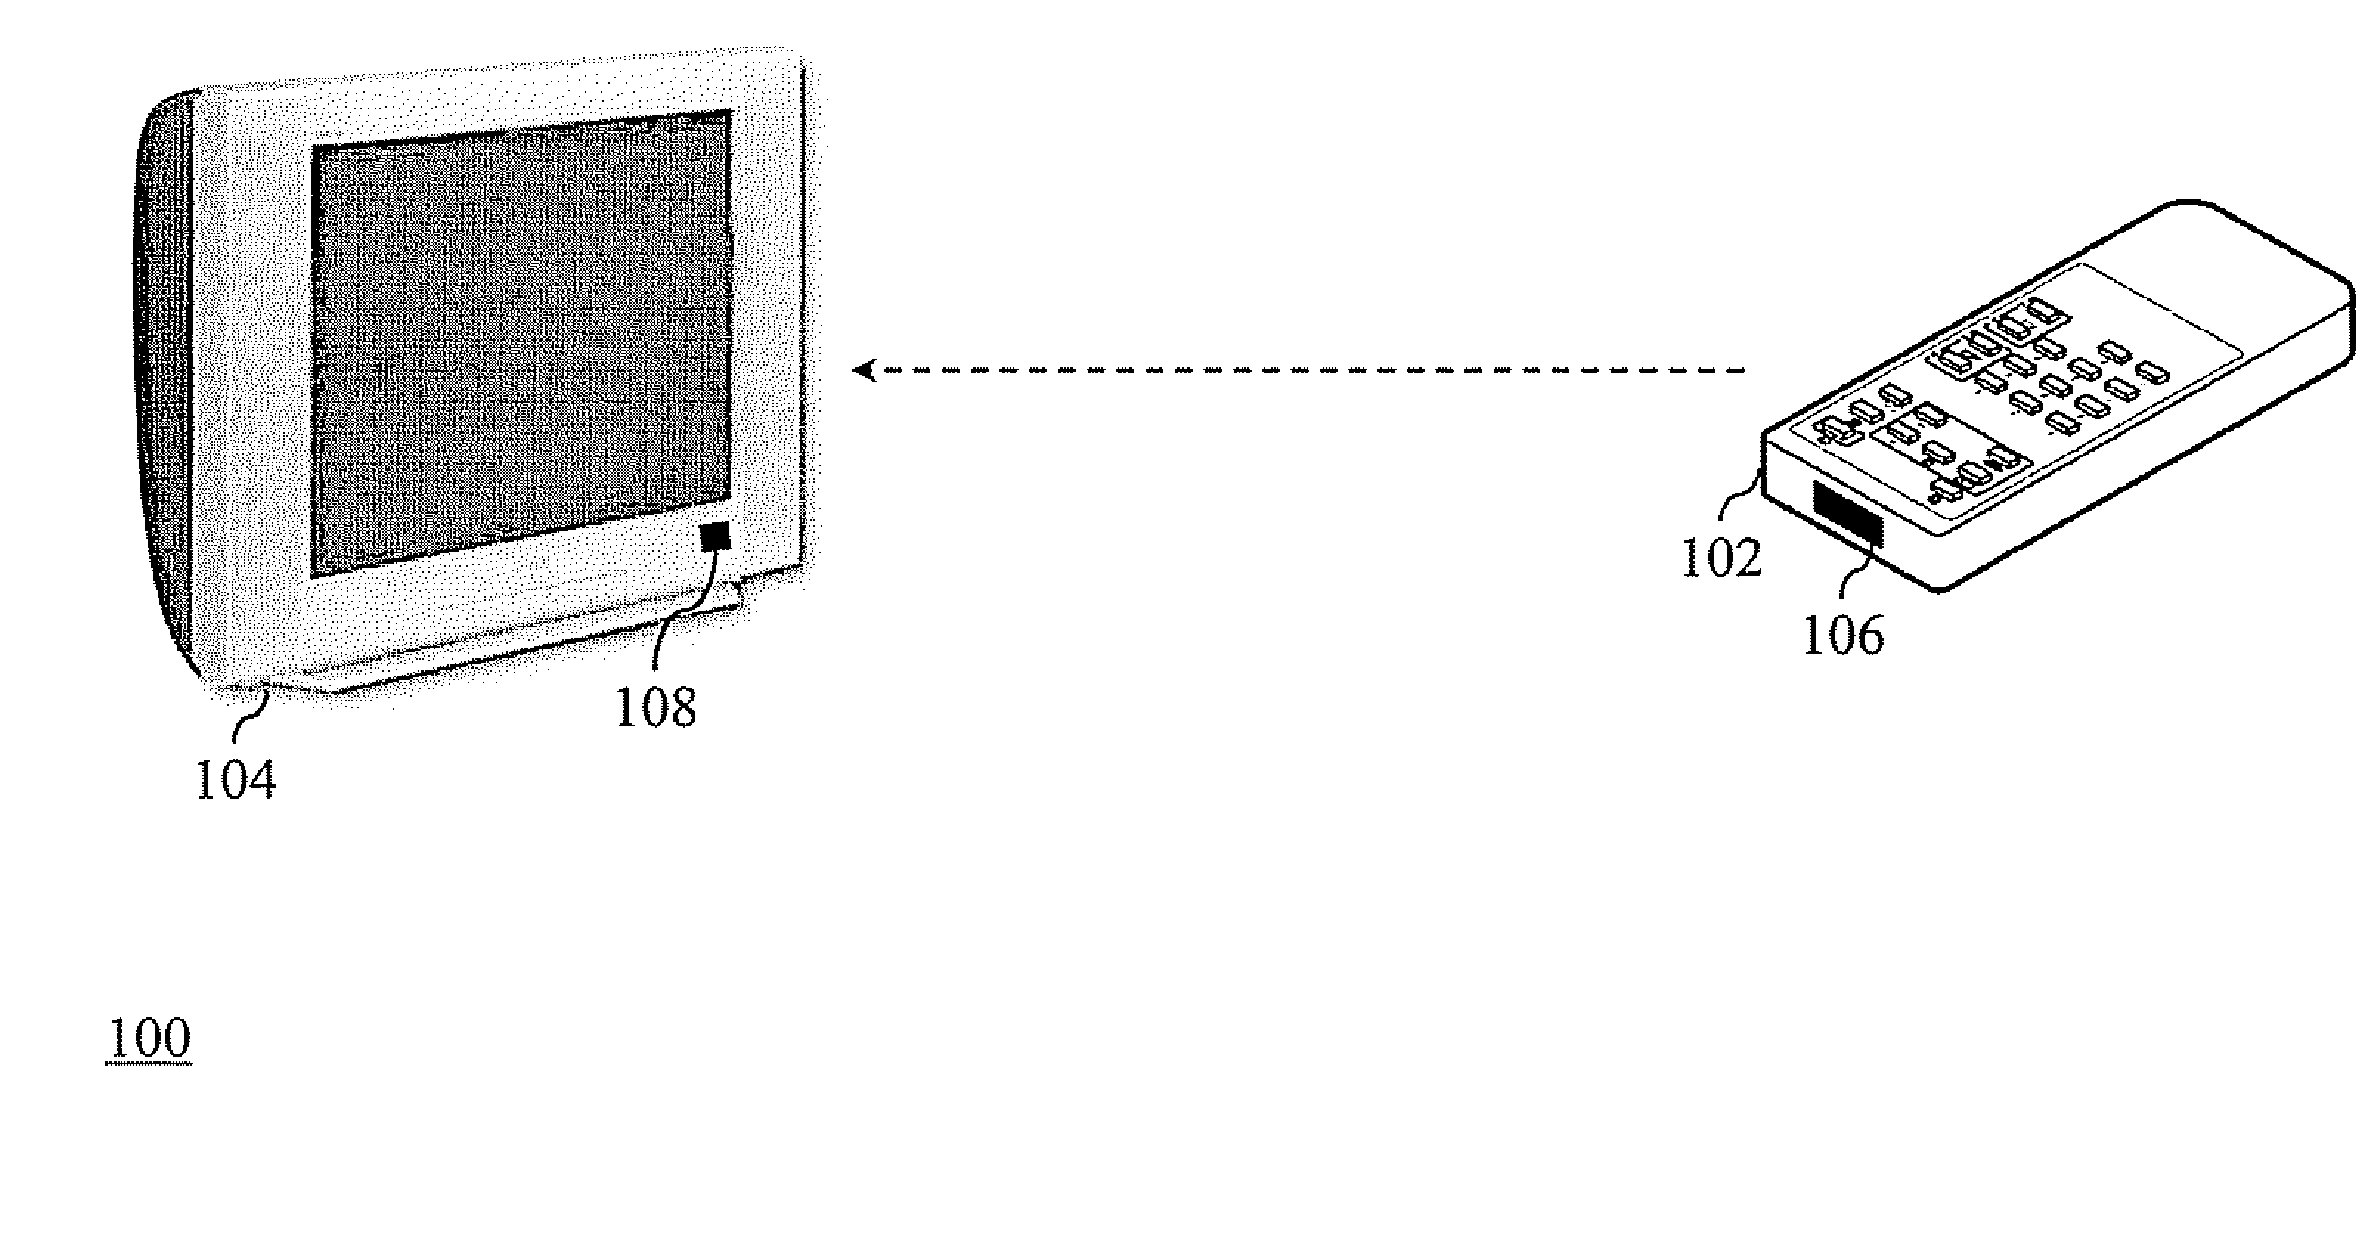 Method and System for Pairing Electronic Devices